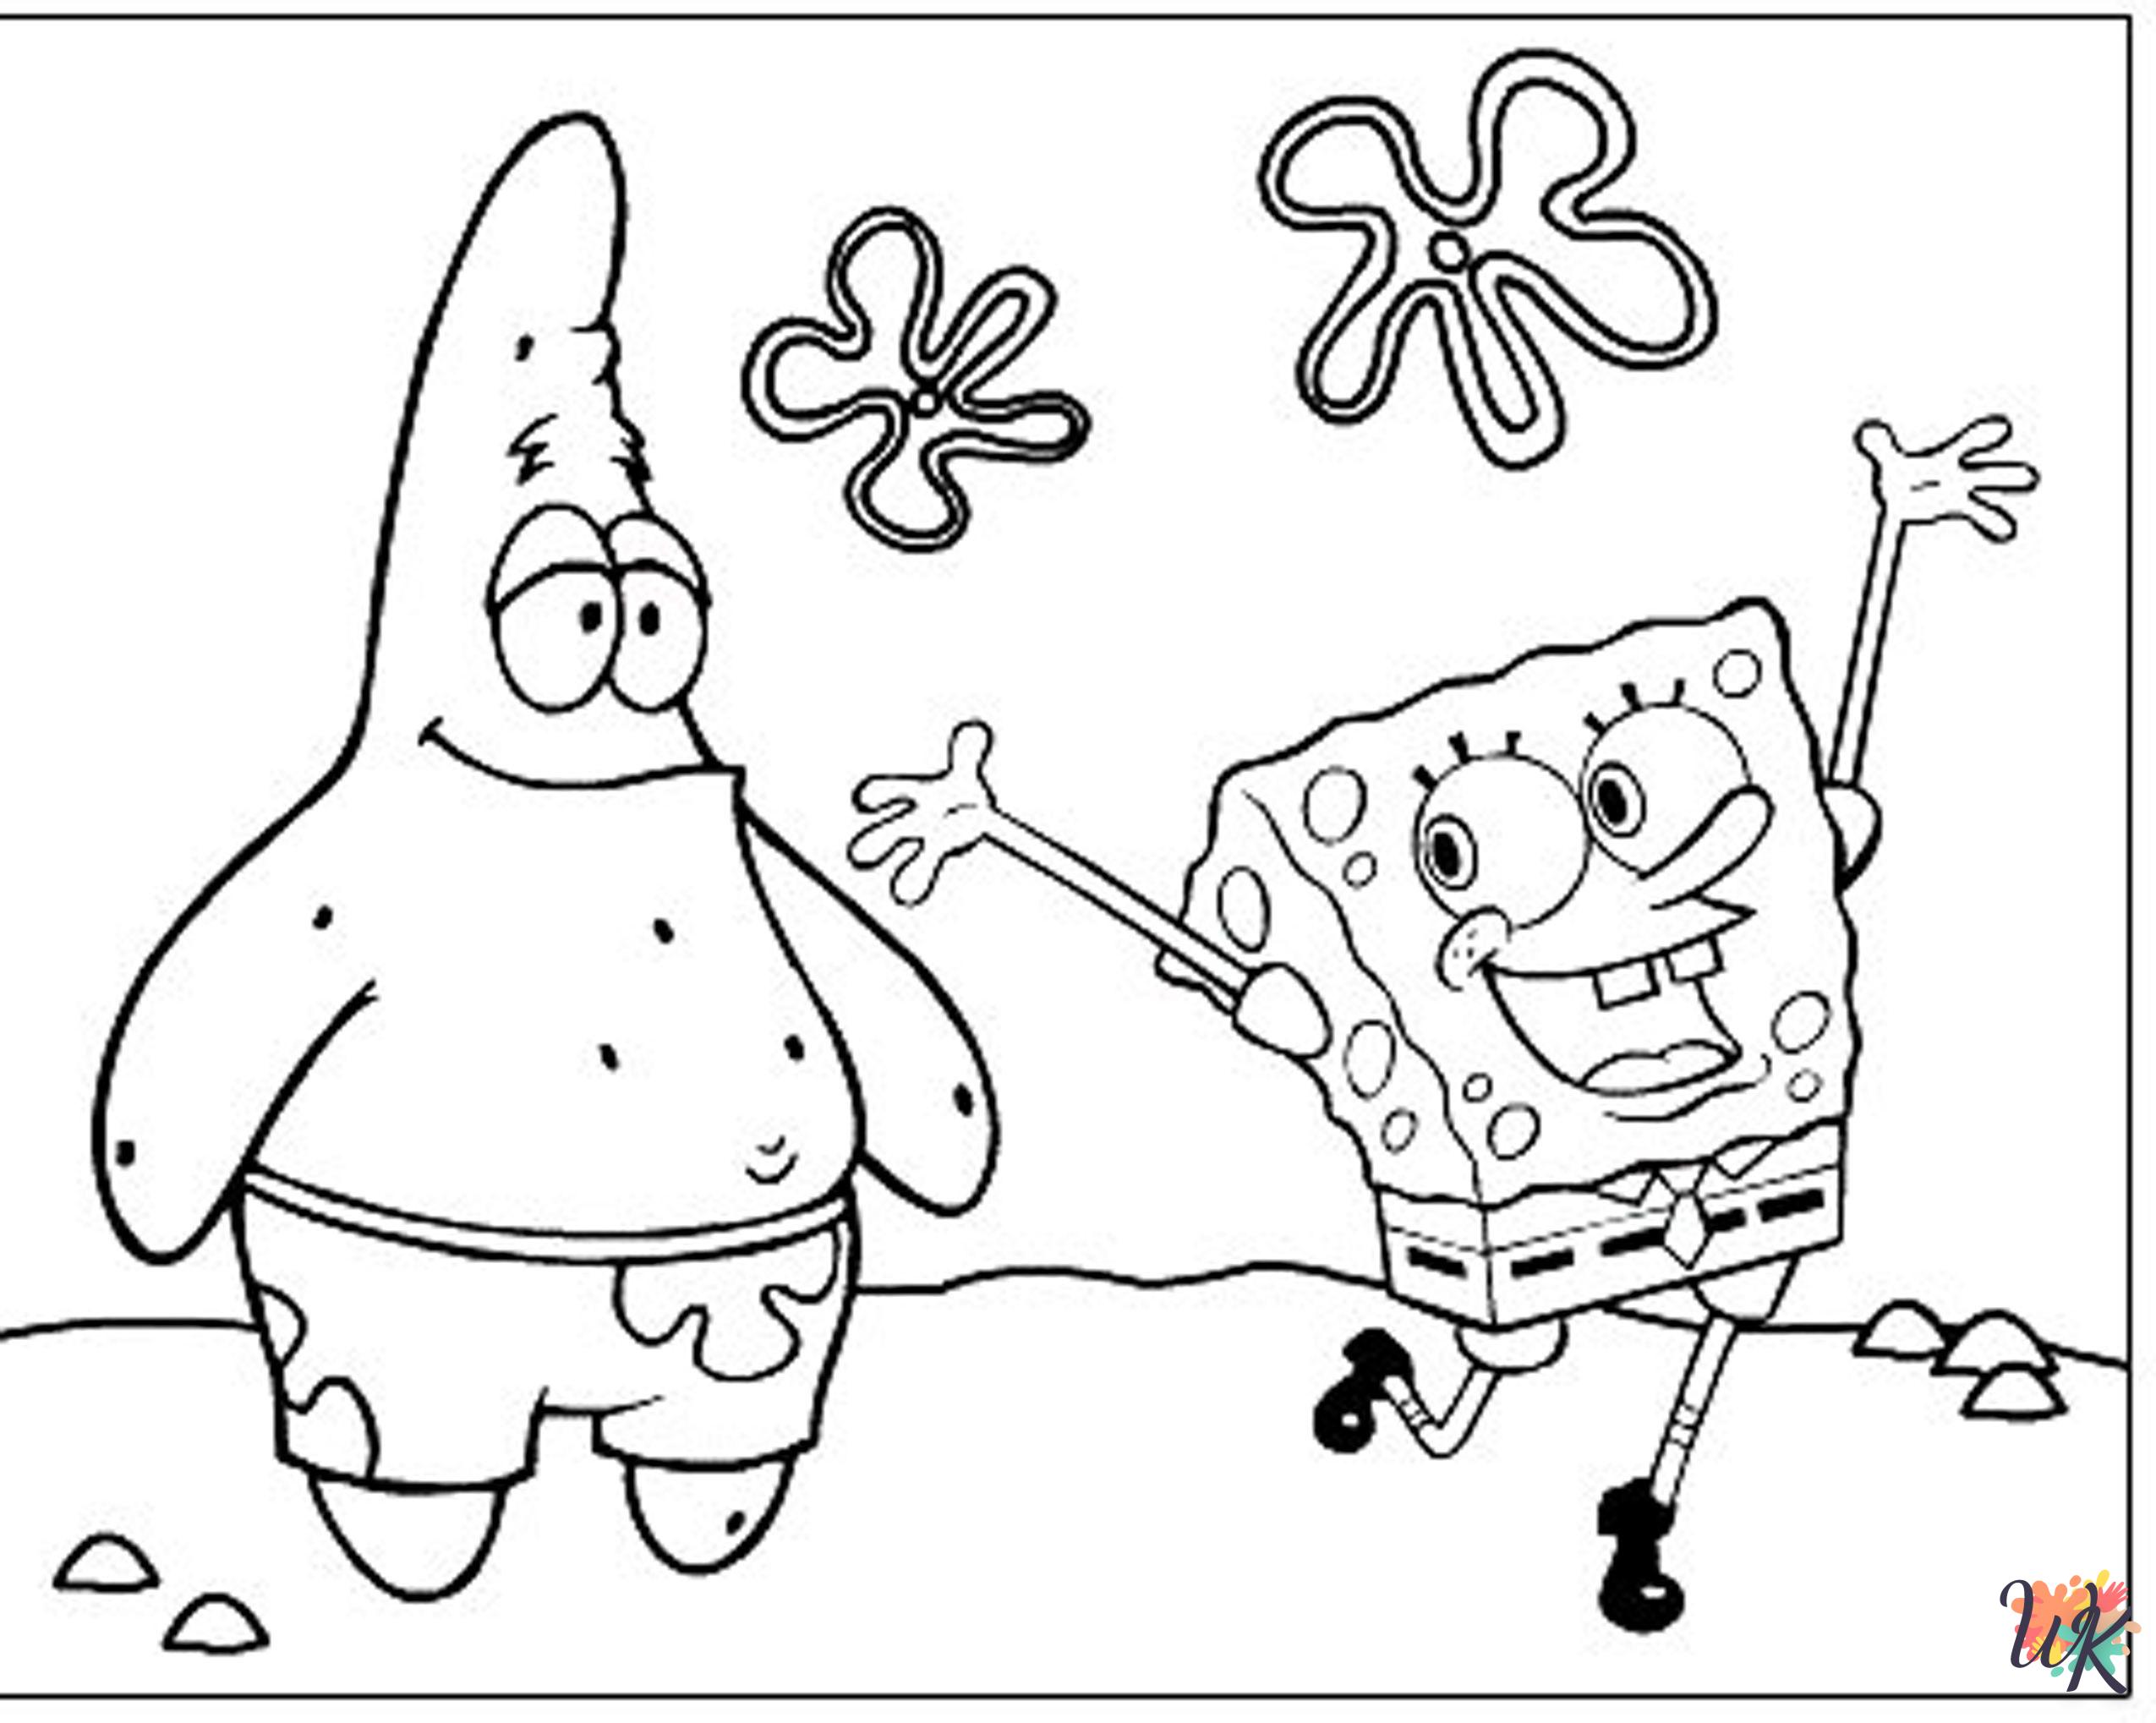 Spongebob coloring pages for adults easy